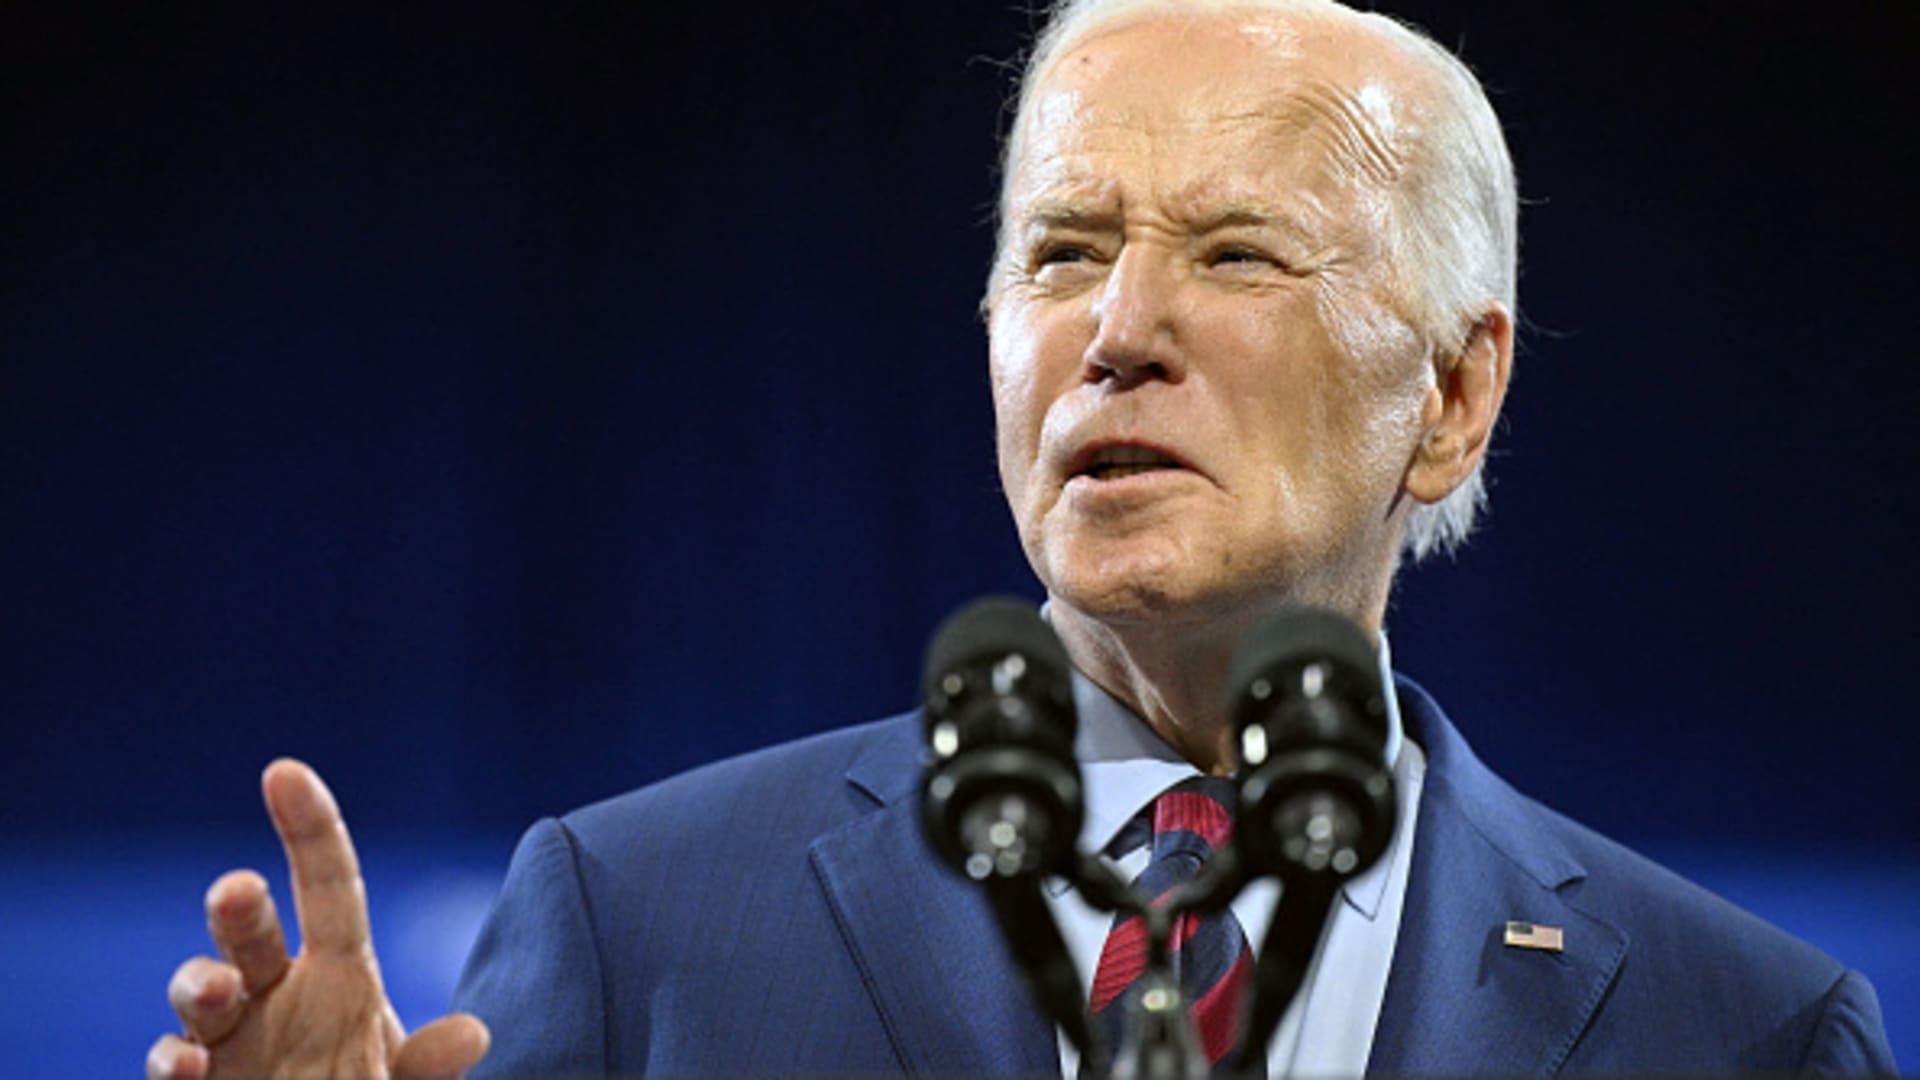 Biden meets with executives from Citi, United Airlines and others